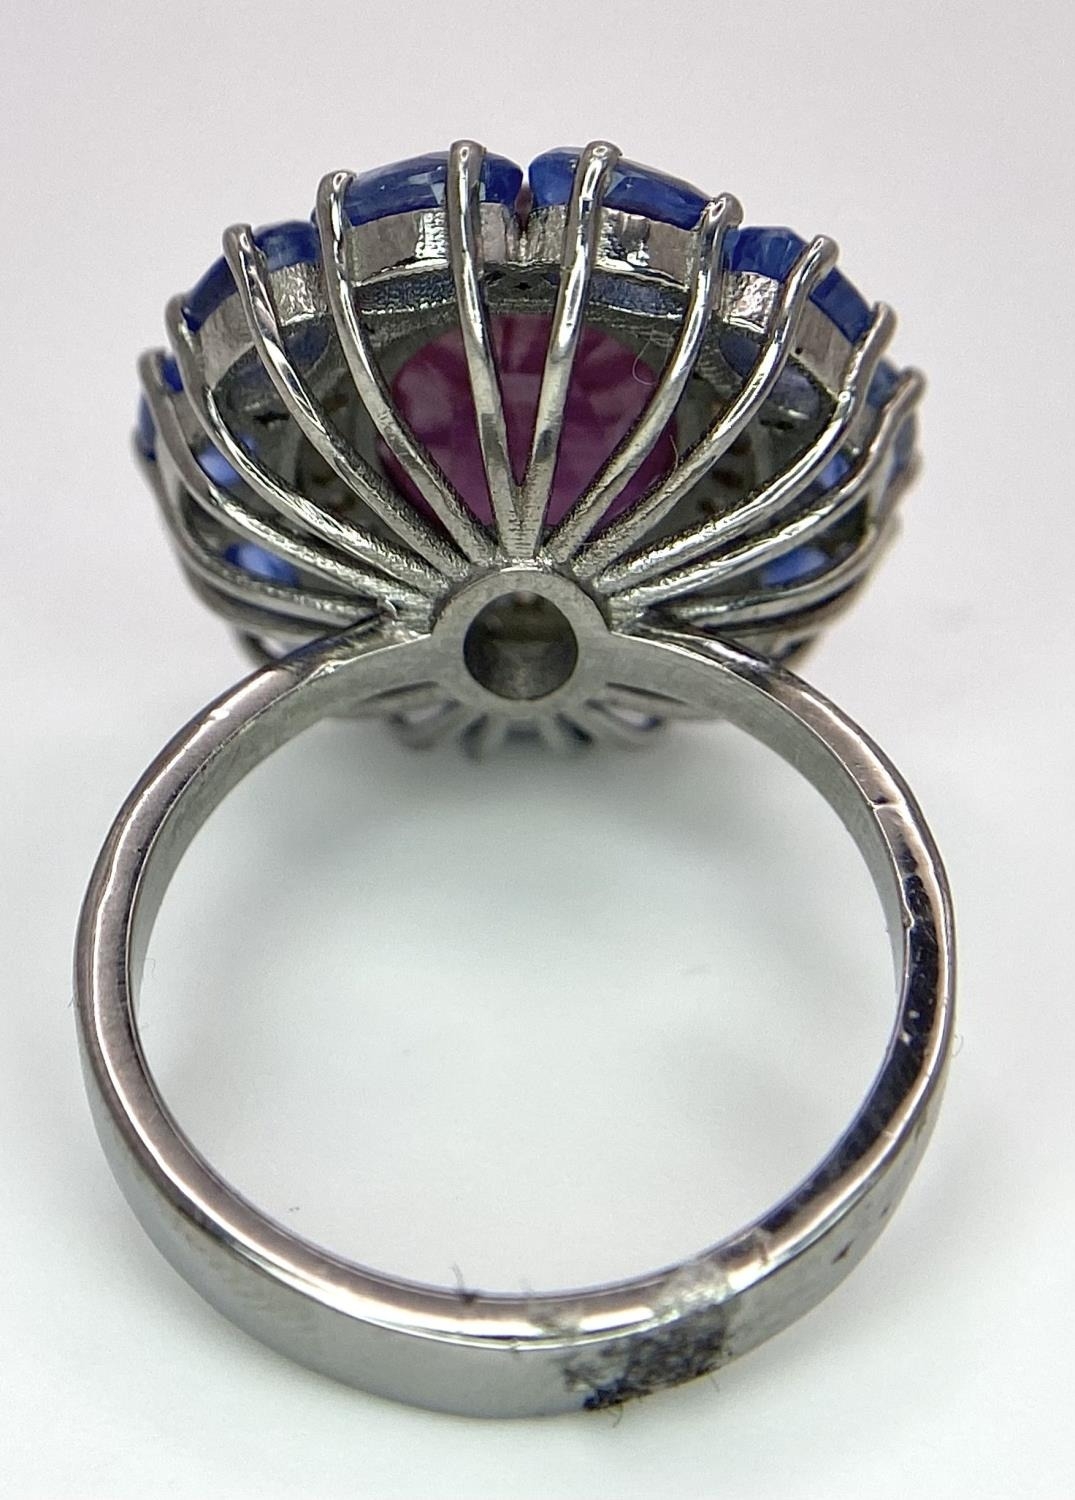 A 5.65ct Ruby Dress Ring with Halo of 0.40ctw of Diamonds and 3.70ct of Kyanite Stones. Set in 925 - Image 4 of 7